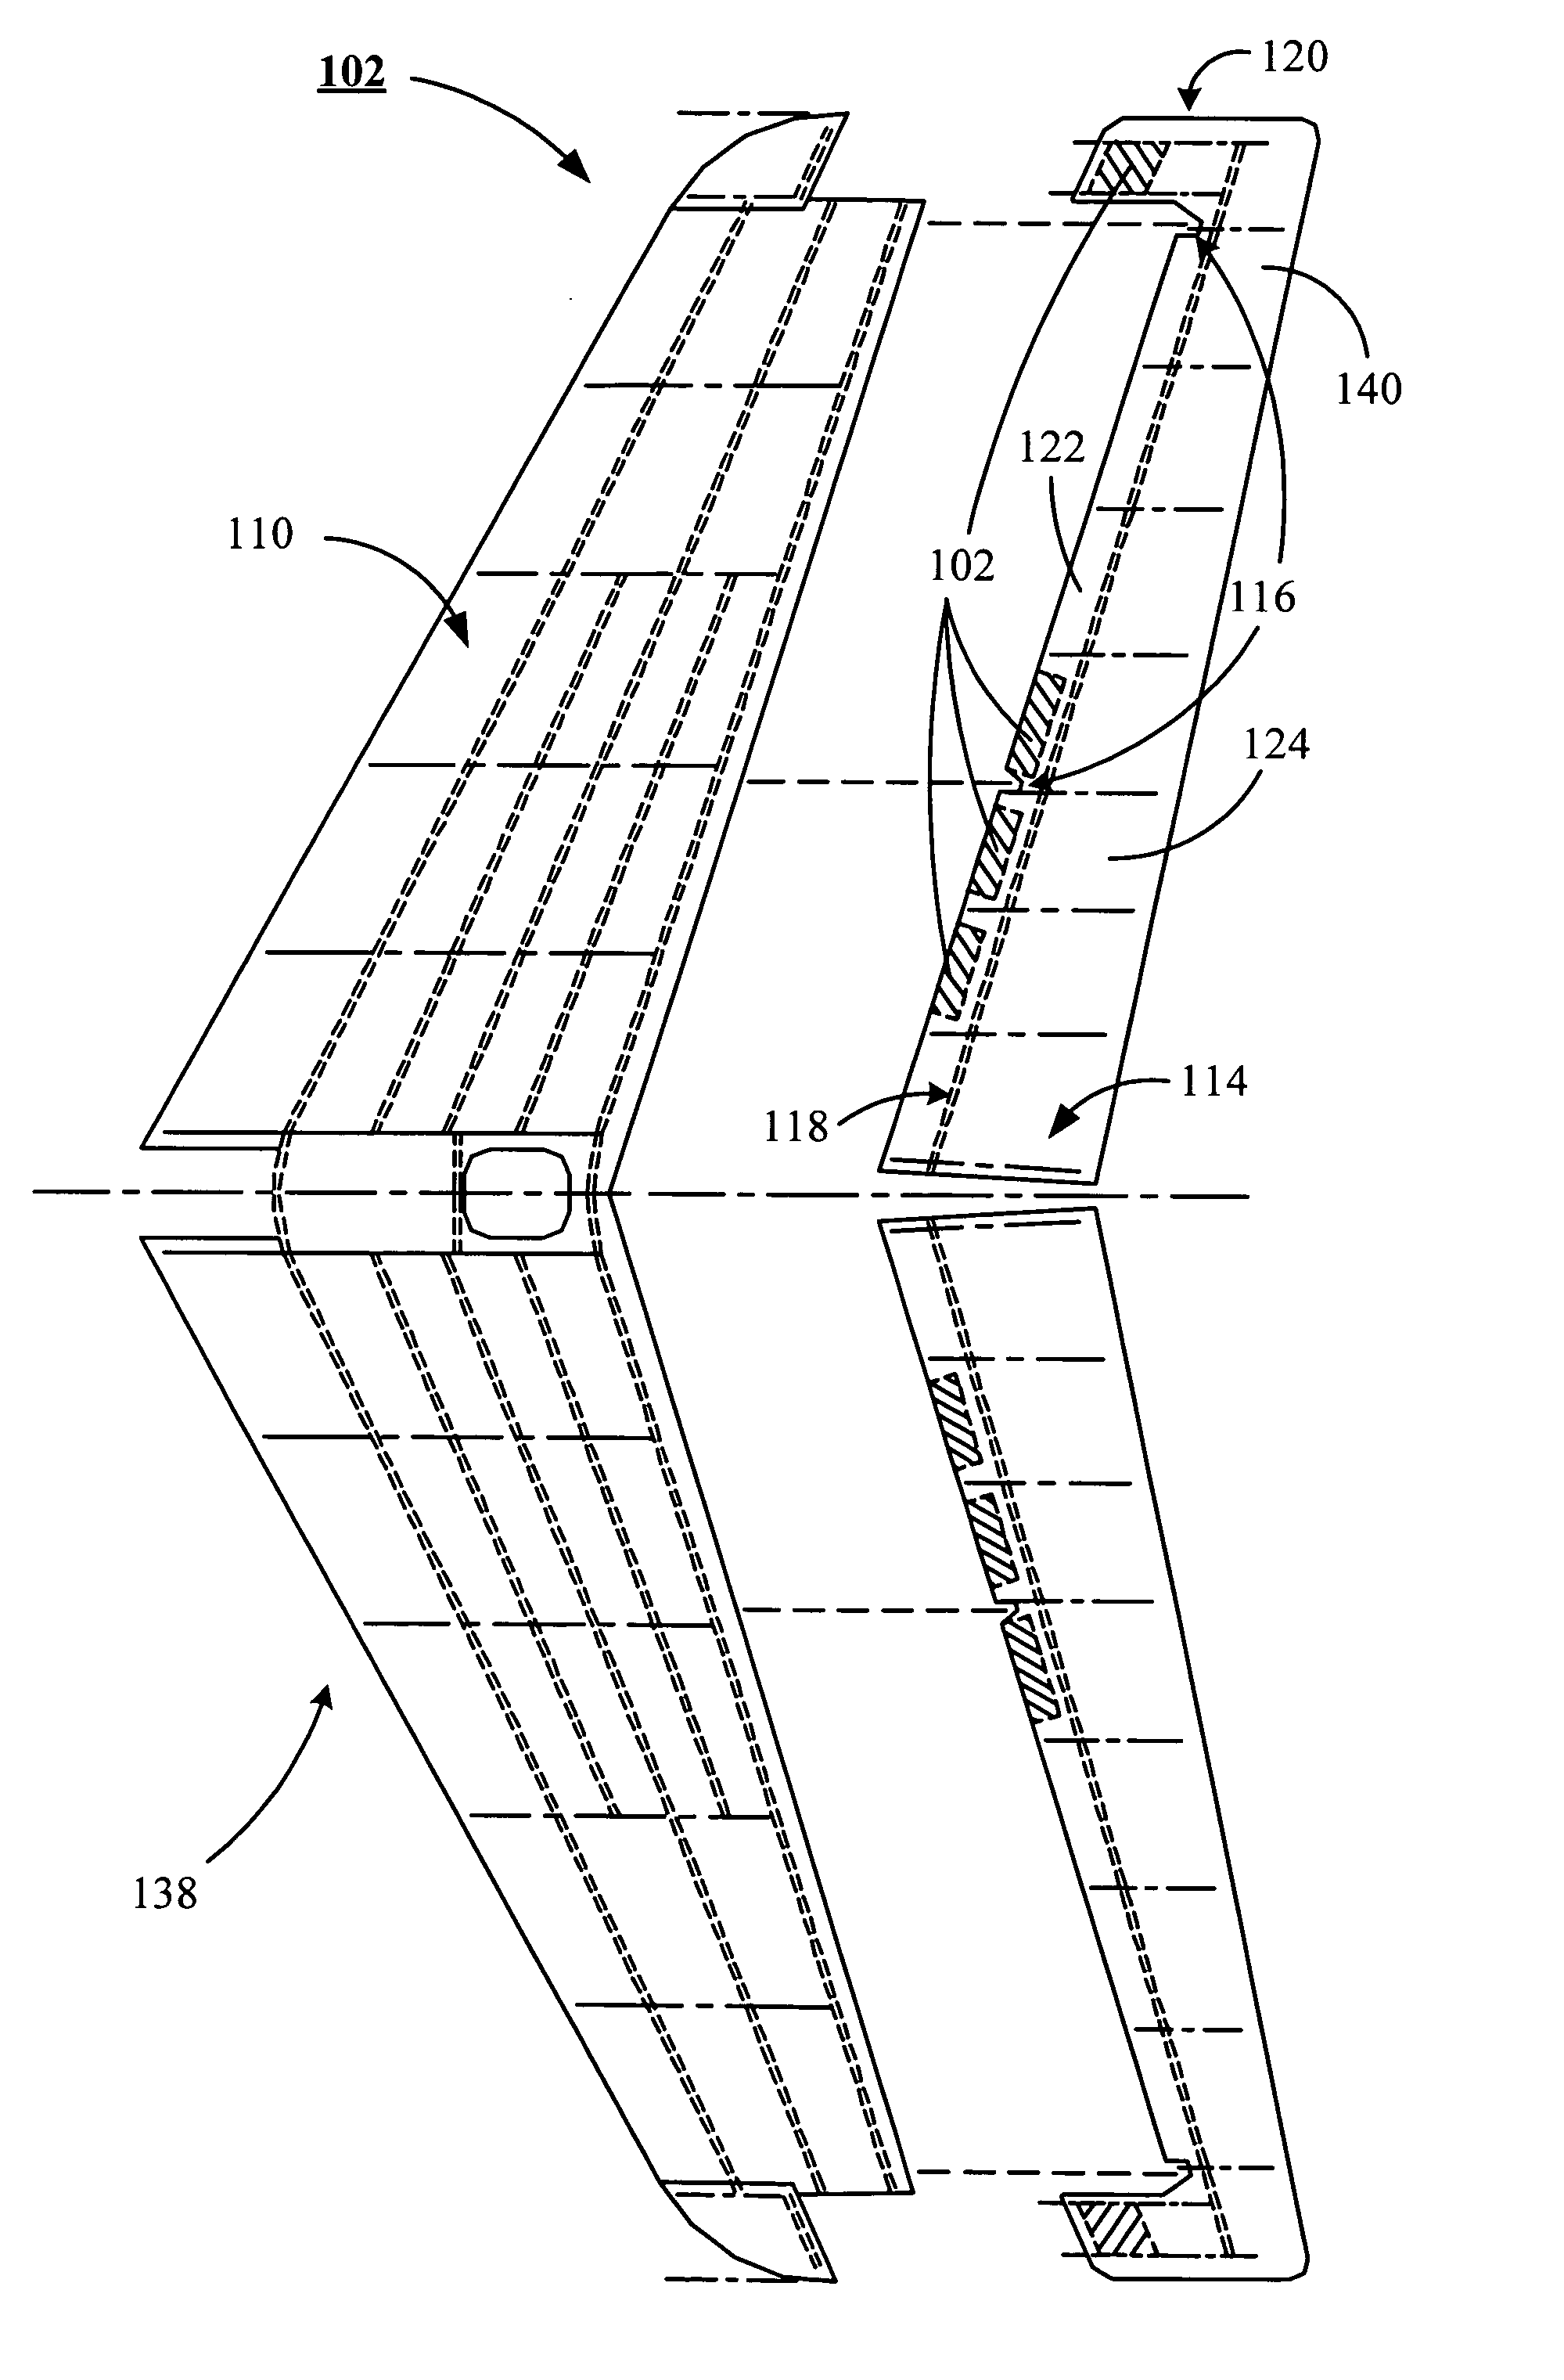 Structural dynamic stability for an aircraft